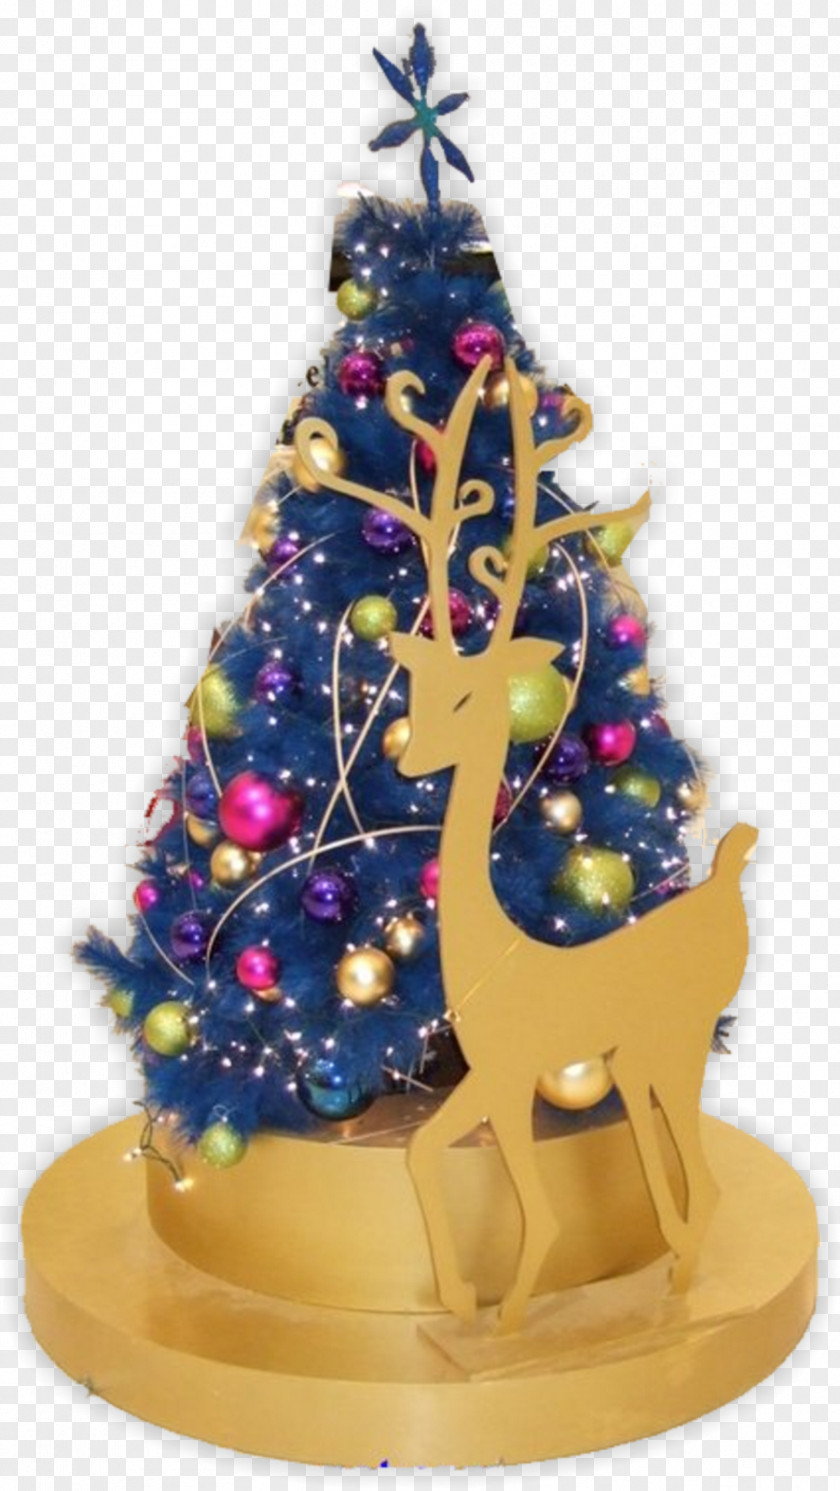 Christmas Tree Ornament Spruce Fir PNG